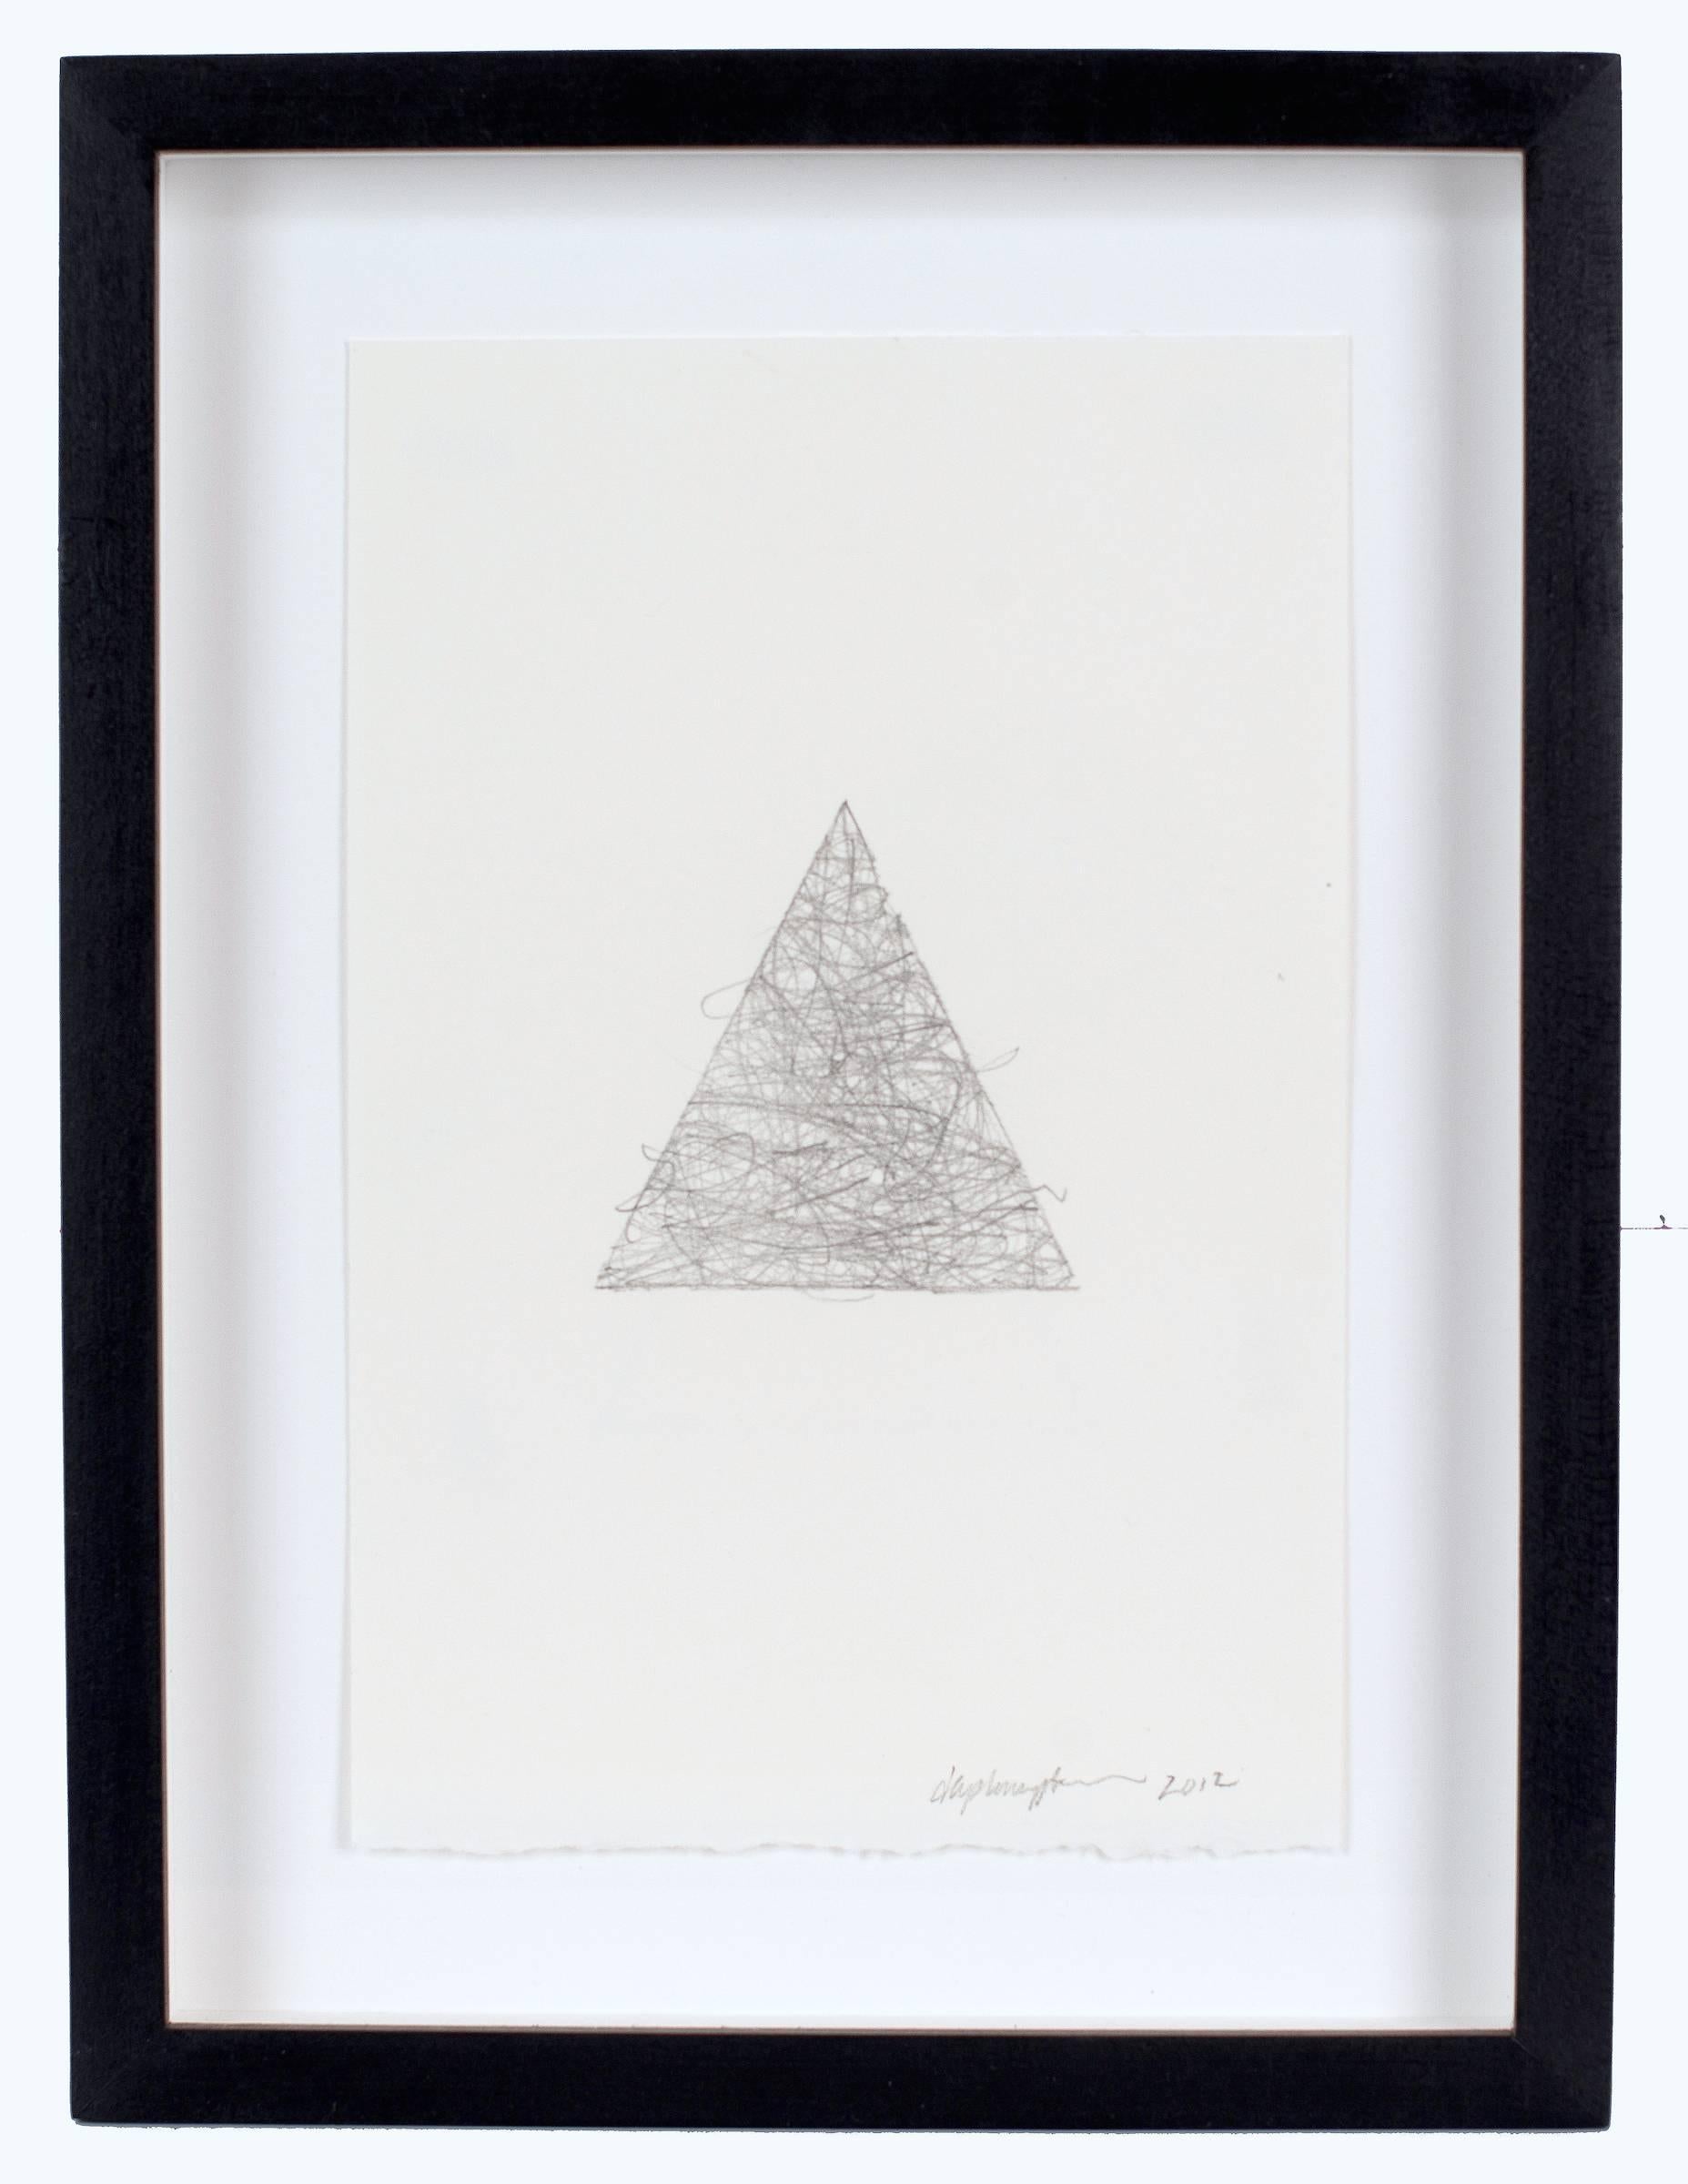 Daphne Taylor Abstract Drawing - "Triangle Series #5" - Abstract Quilt Drawing